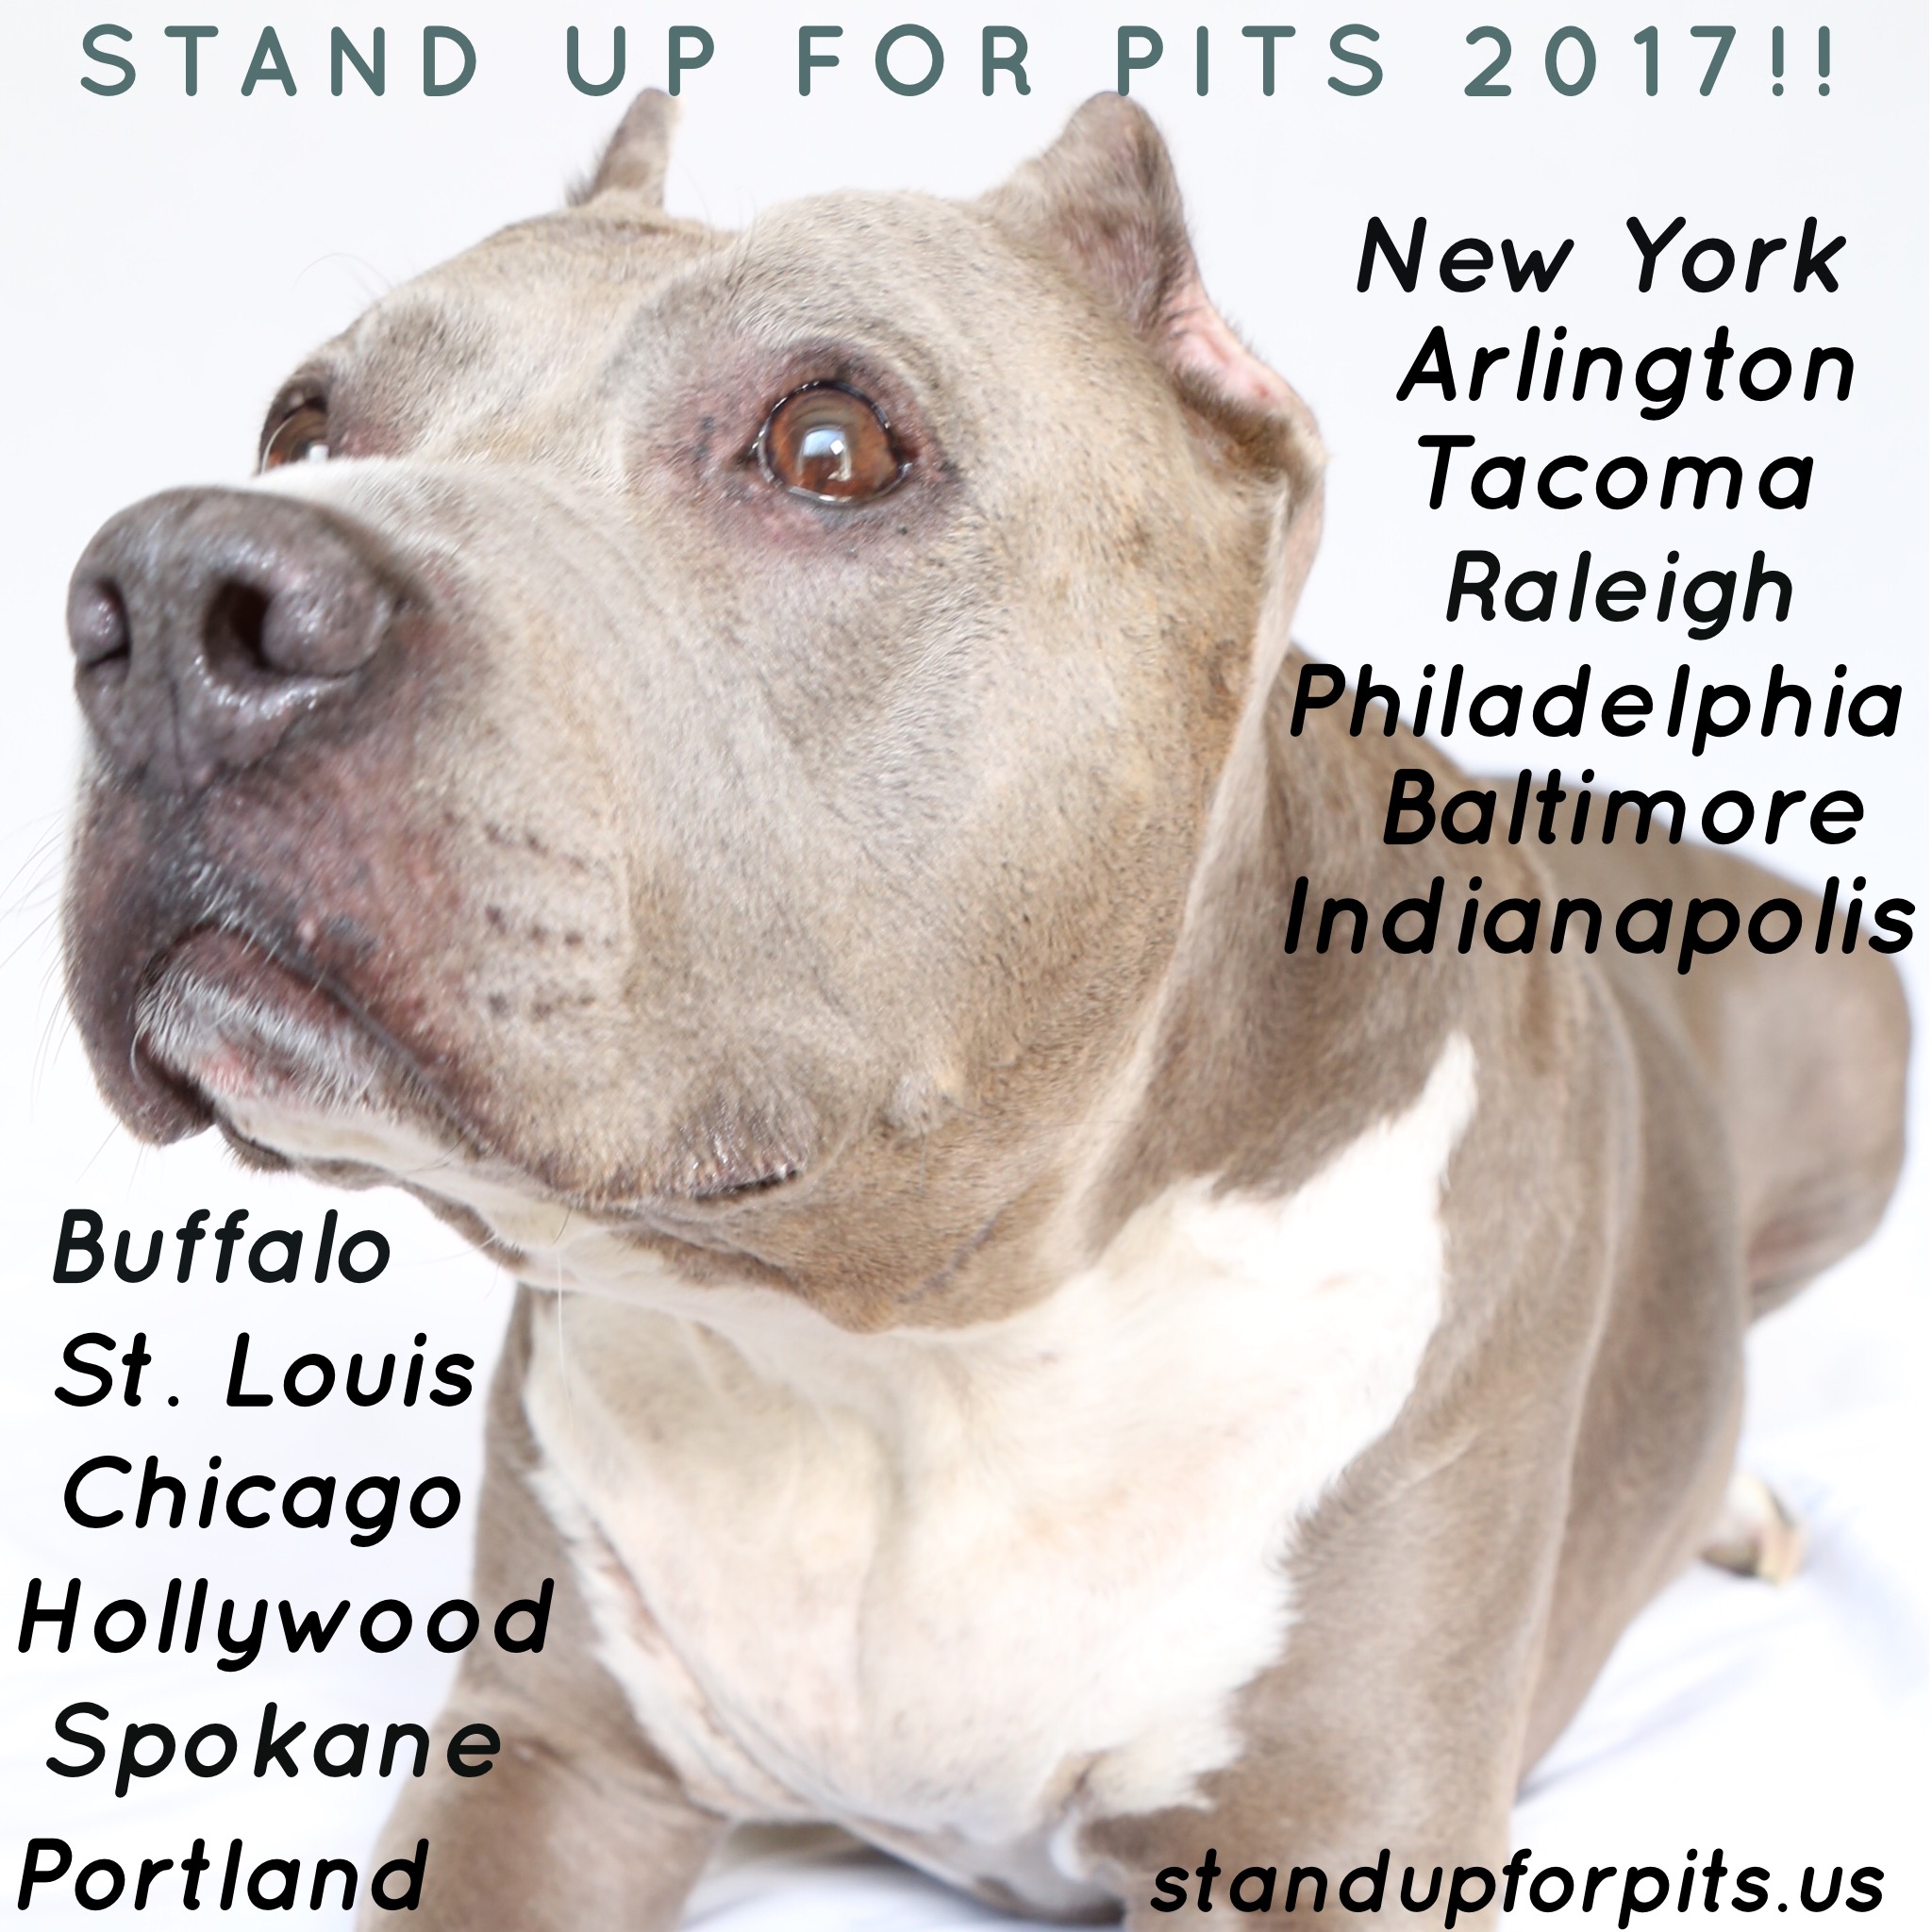 2017 Stand Up For Pits TOUR!!!